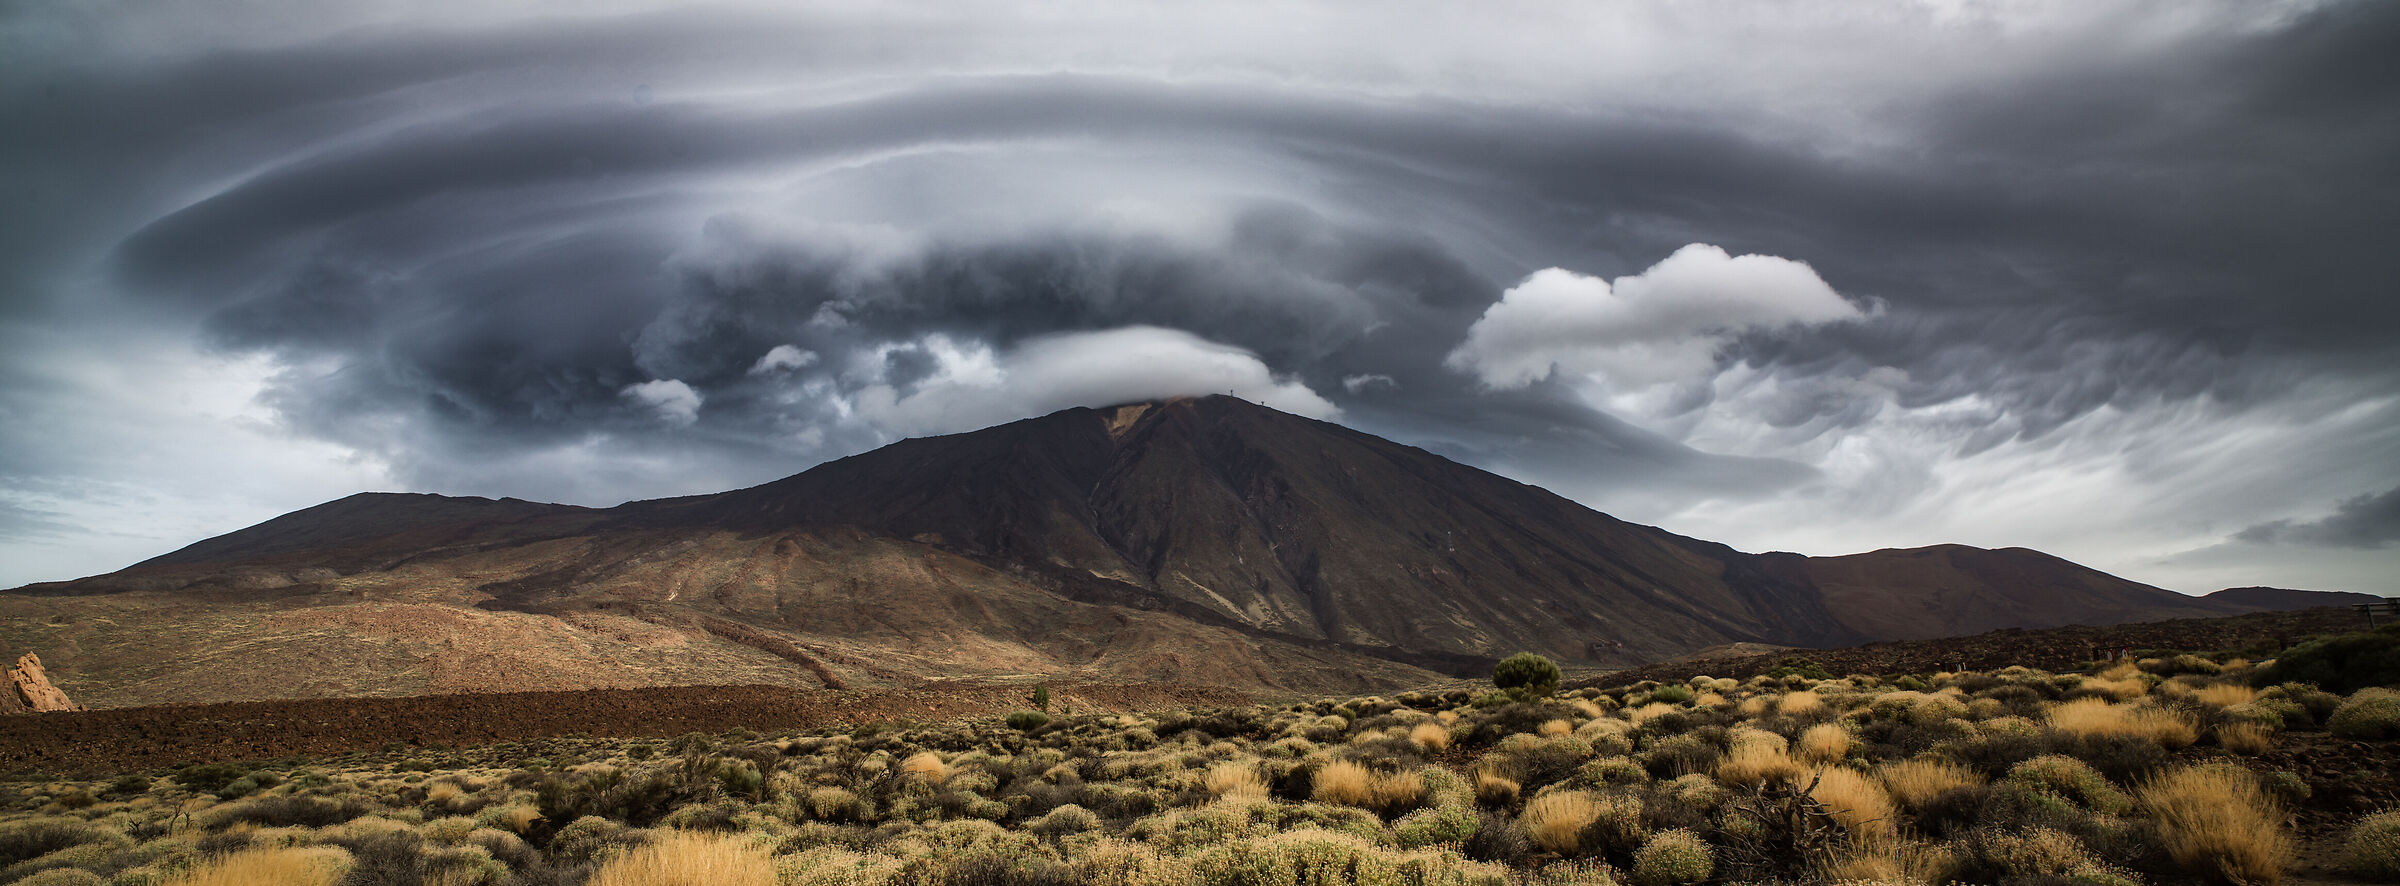 Clouds over Mount Teide...